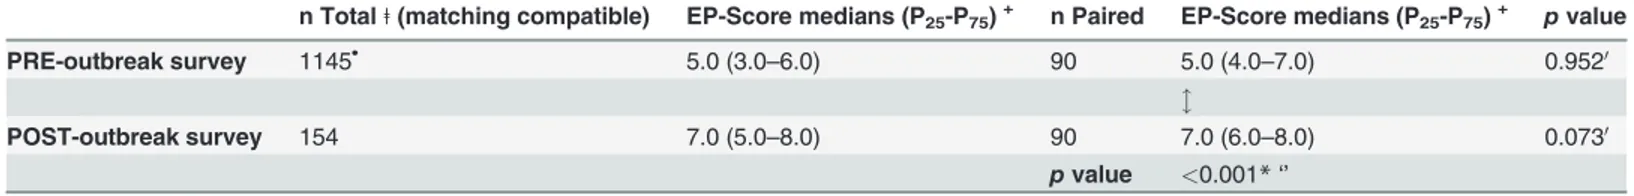 Table 3. The EP-scores from Total and Paired samples of both PRE/POST-outbreak surveys and associations between them.